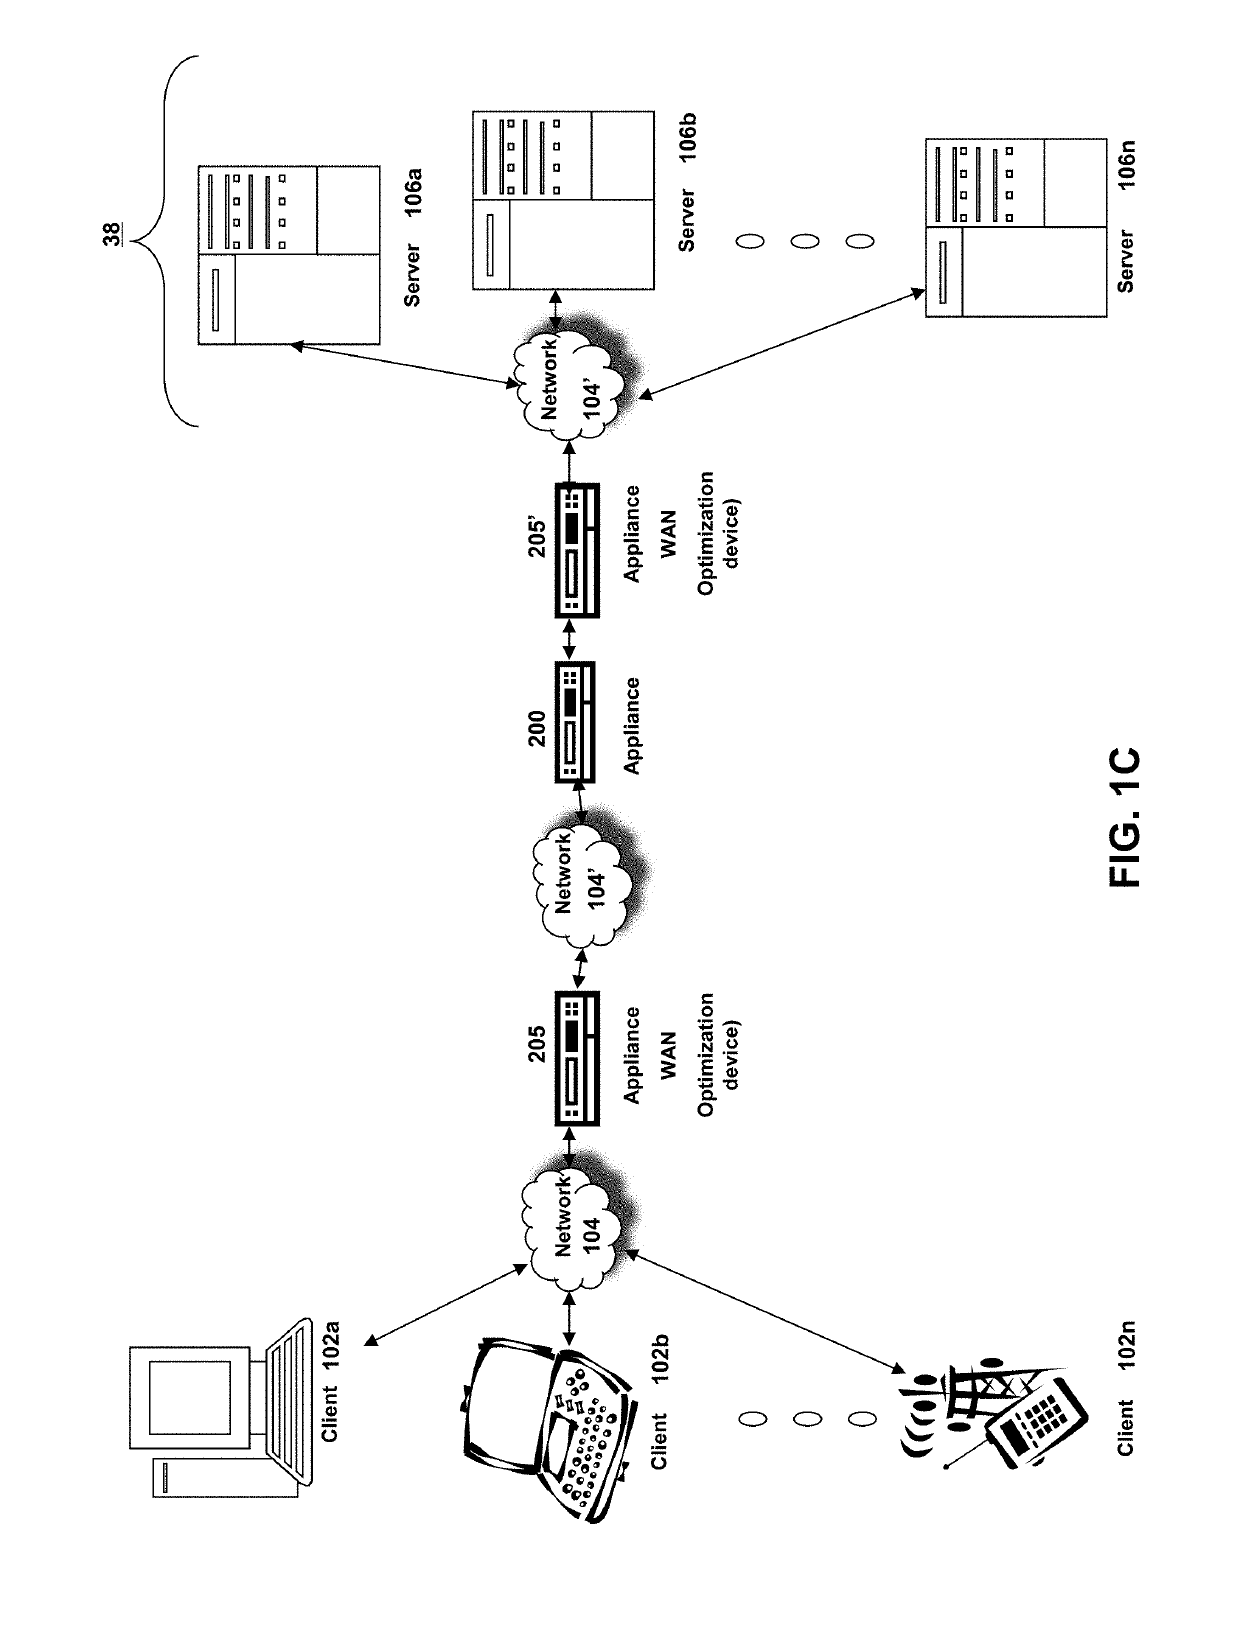 Systems and methods for provisioning network automation by logically separating L2-L3 entities from L4-L7 entities using a software defined network (SDN) controller